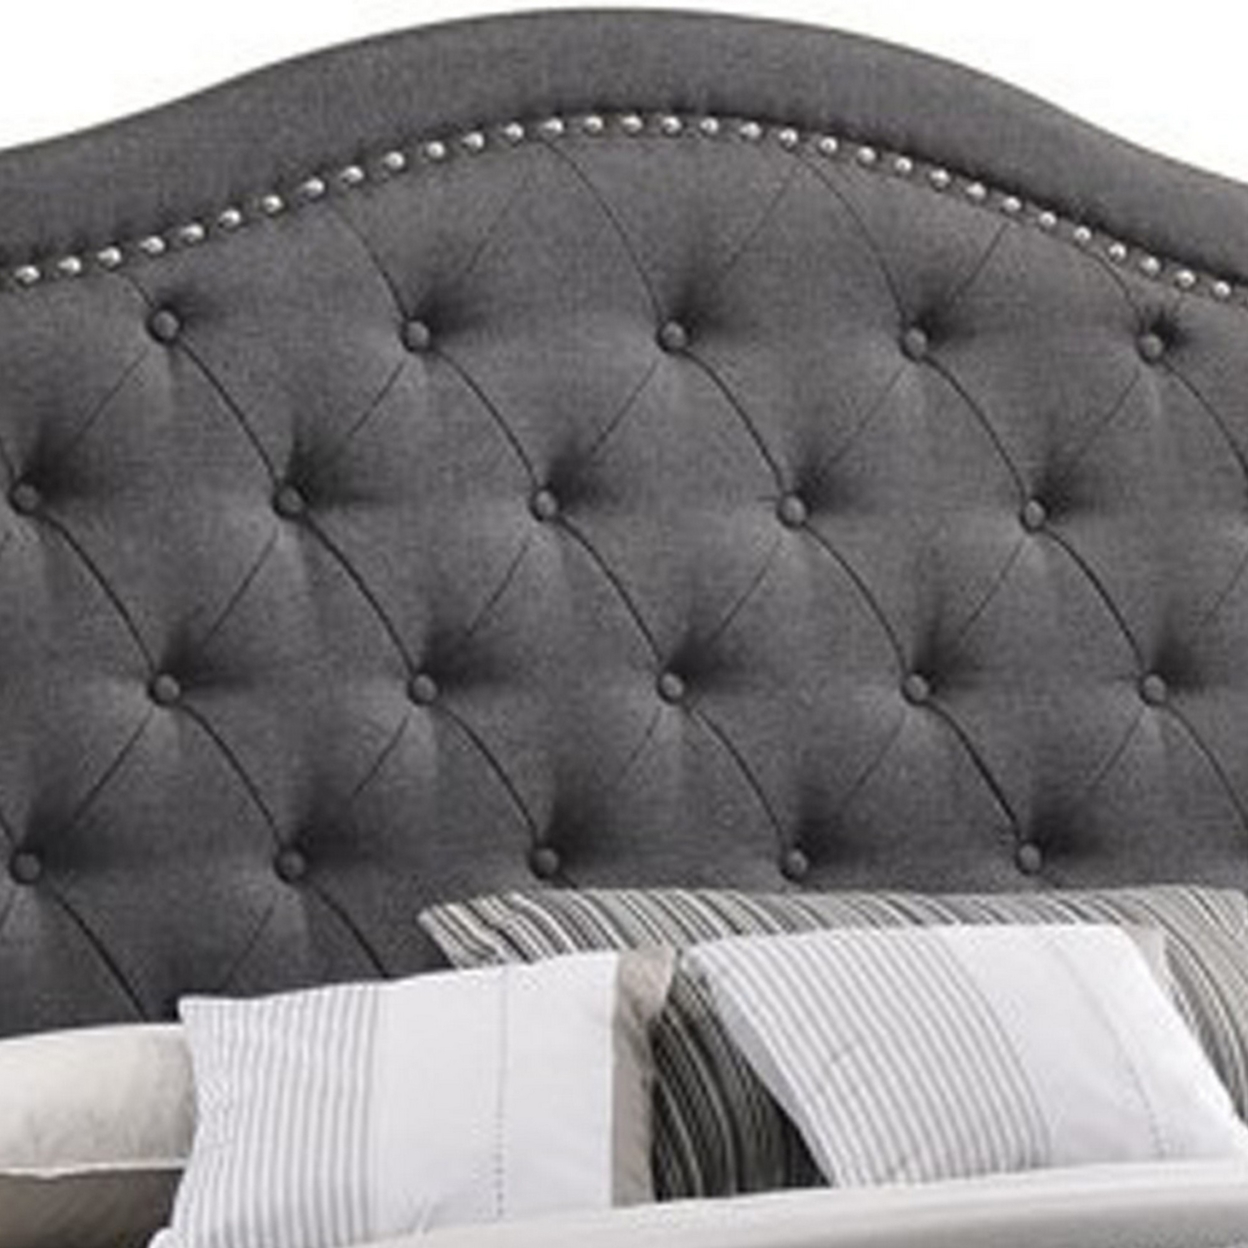 Fabric Upholstered Wooden Demi Wing Full Bed With Camelback Headboard, Gray- Saltoro Sherpi